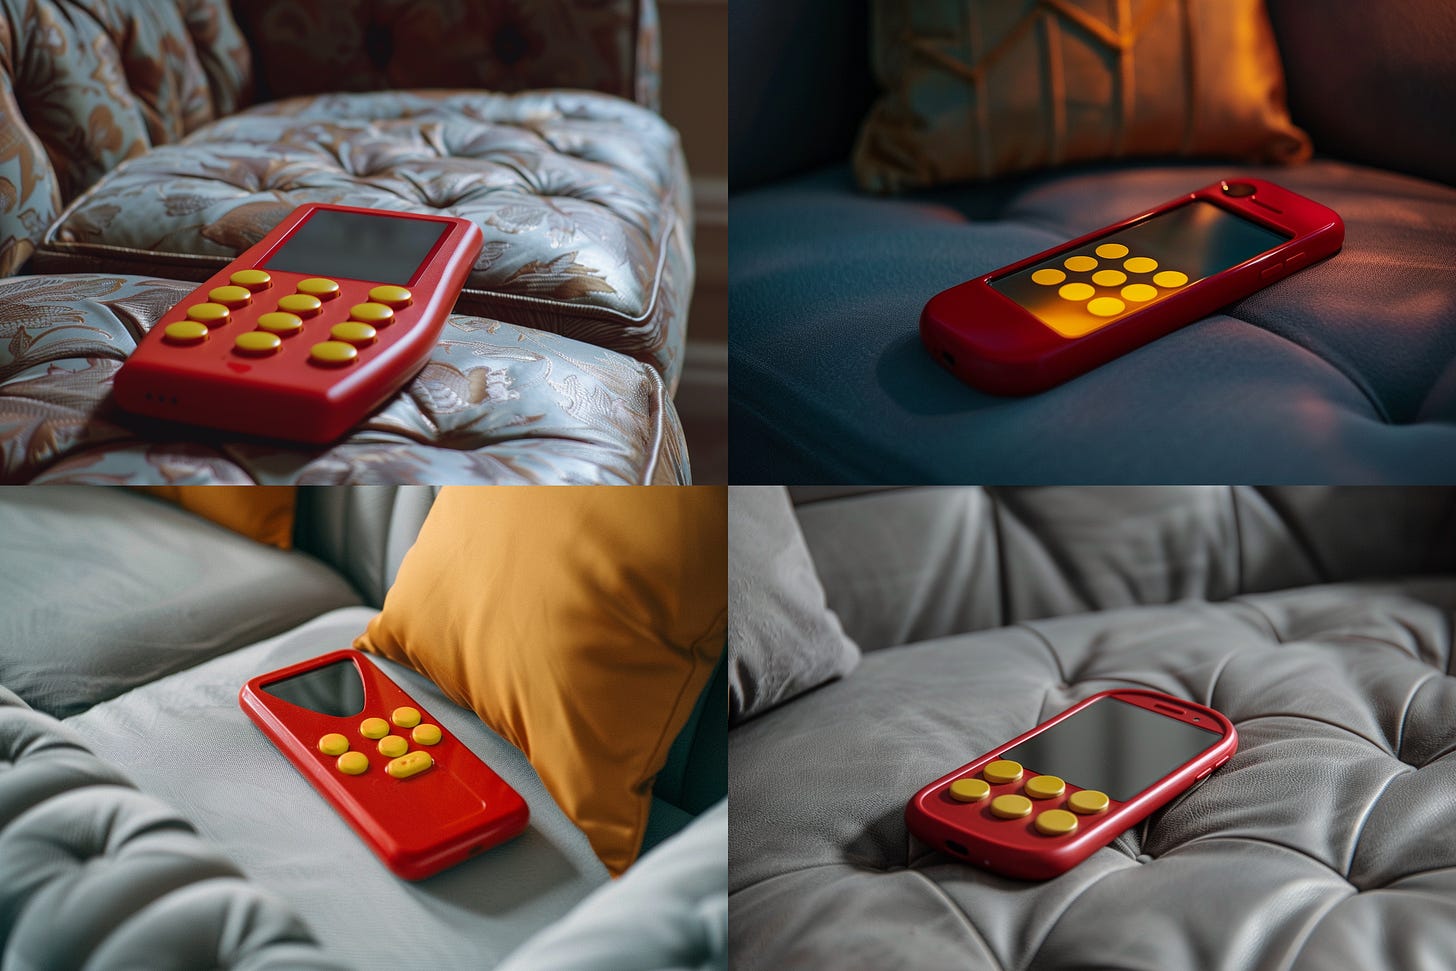 Red phone with yellow buttons lying on a sofa